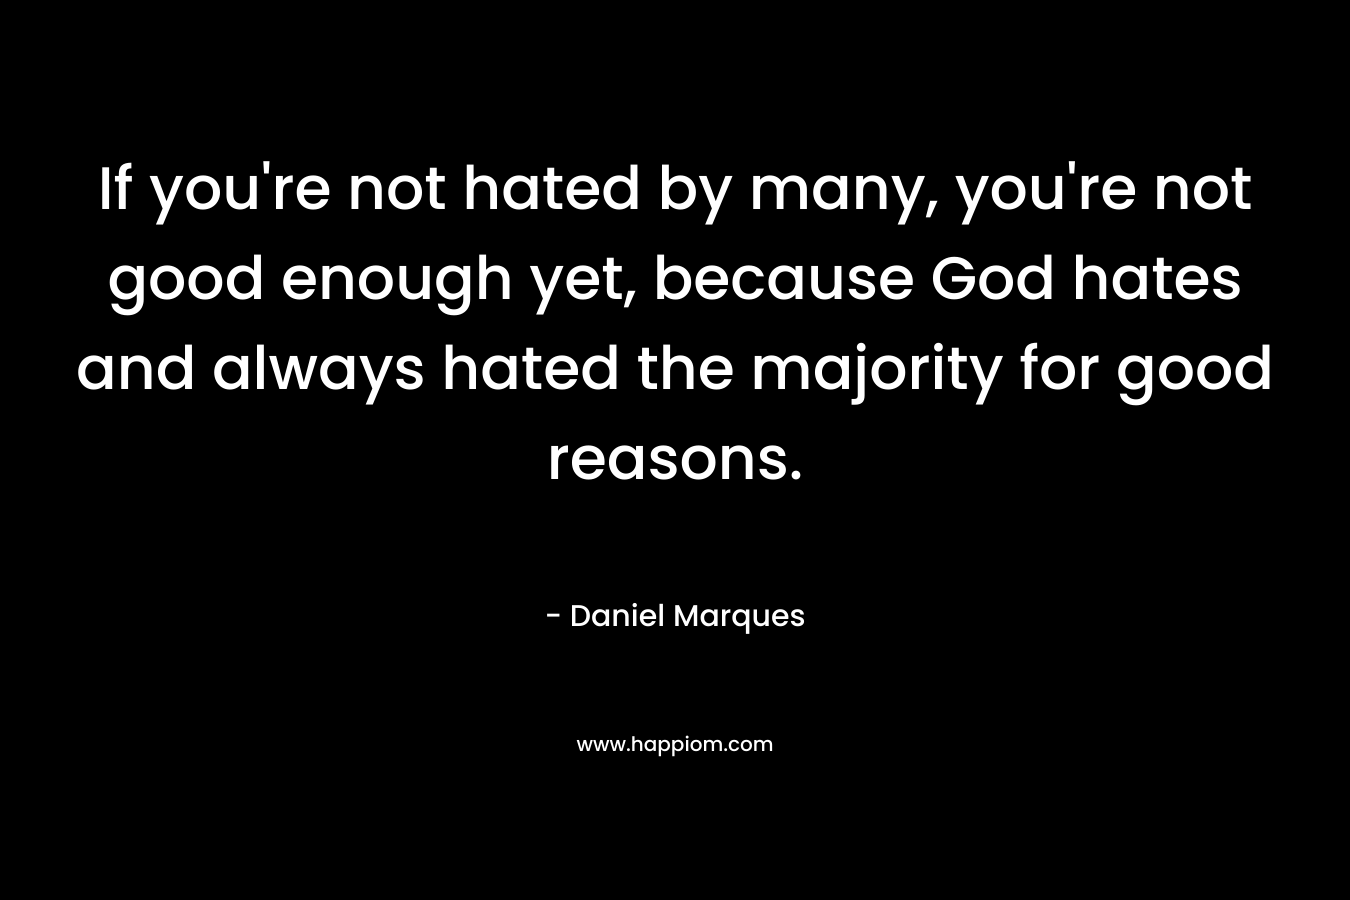 If you're not hated by many, you're not good enough yet, because God hates and always hated the majority for good reasons.